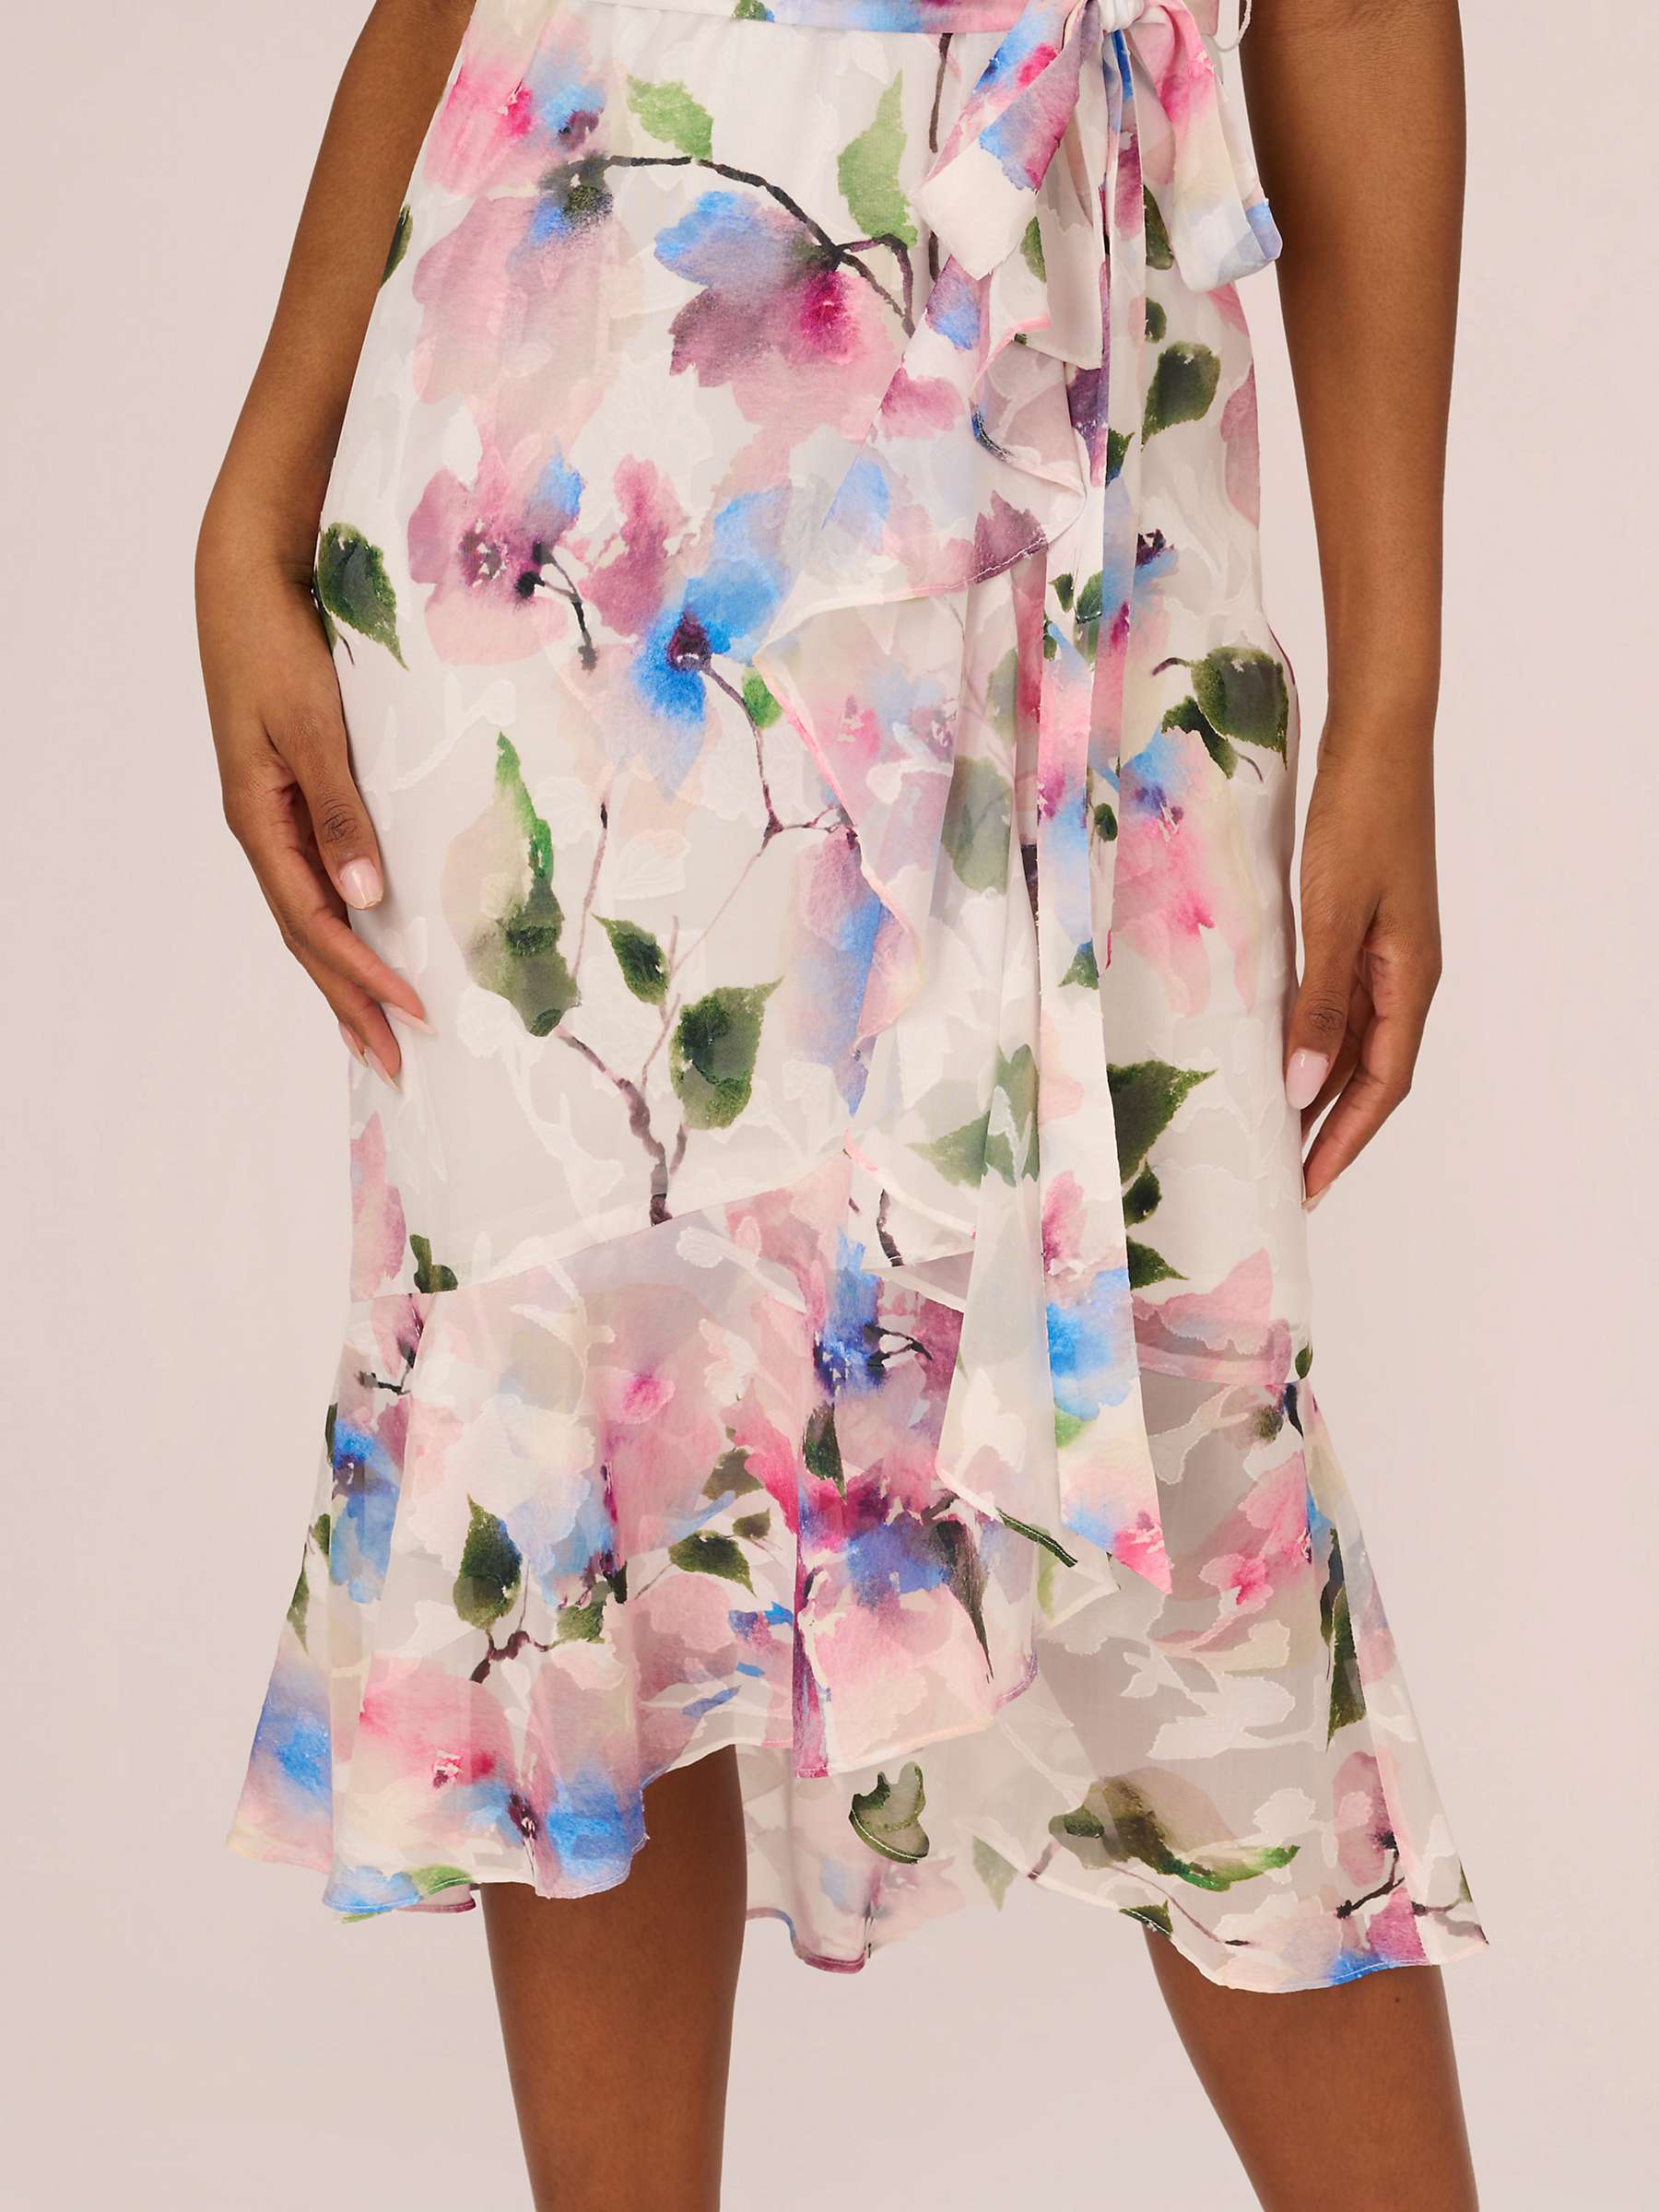 Buy Adrianna Papell Floral High-Low Dress, Ivory/Pink/Multi Online at johnlewis.com